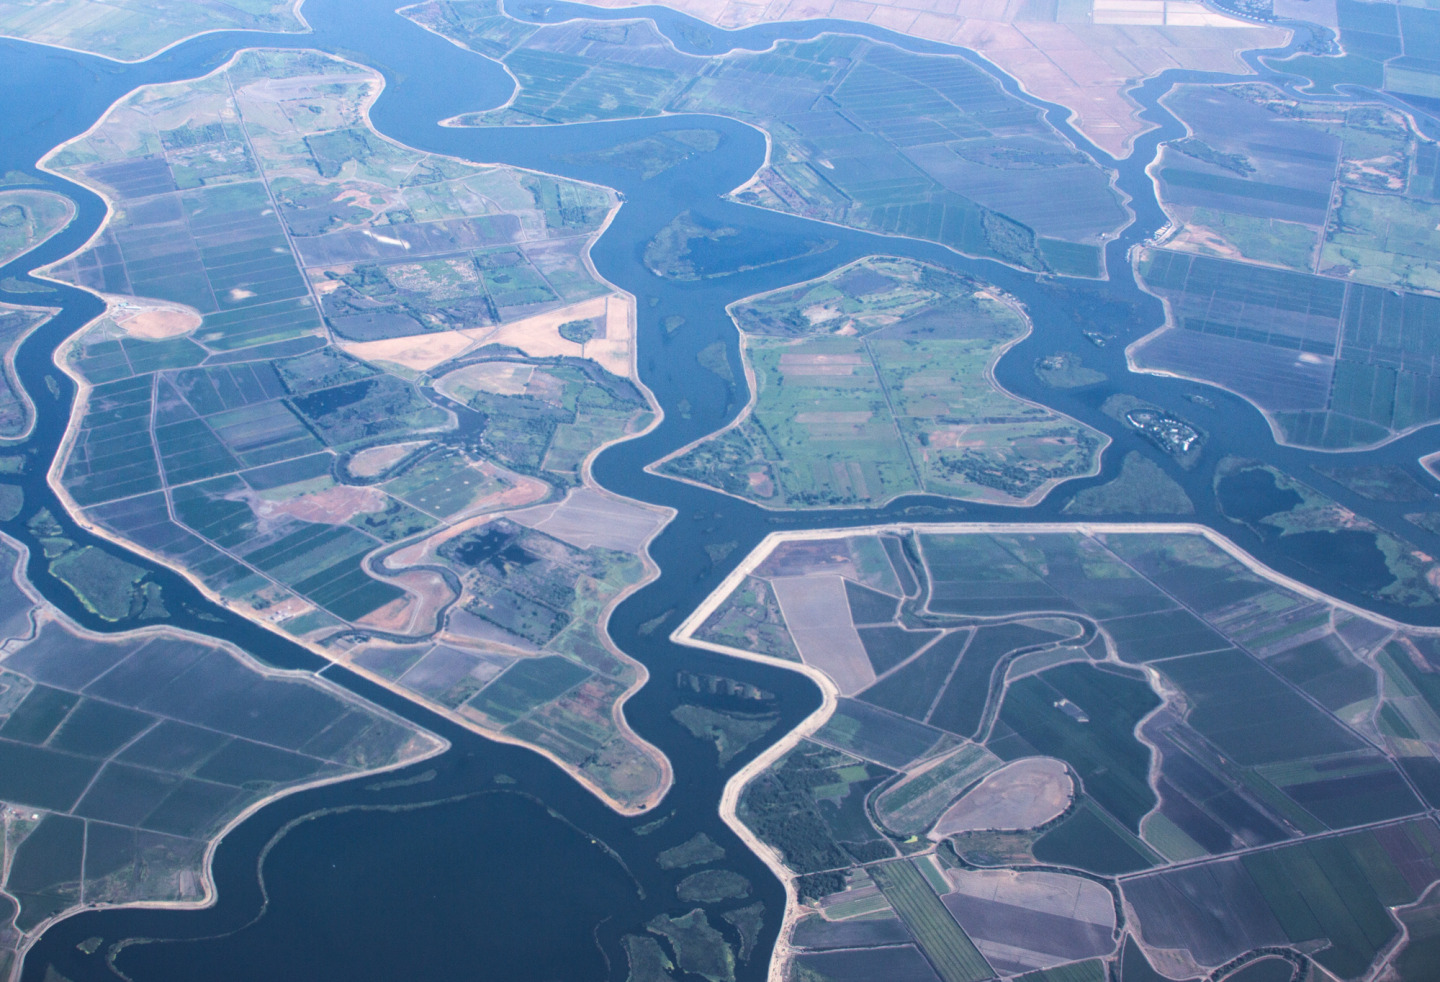 The Sacramento-San Joaquin Delta has been almost completely transformed over the past 150 years. (Dan Brekke/KQED)